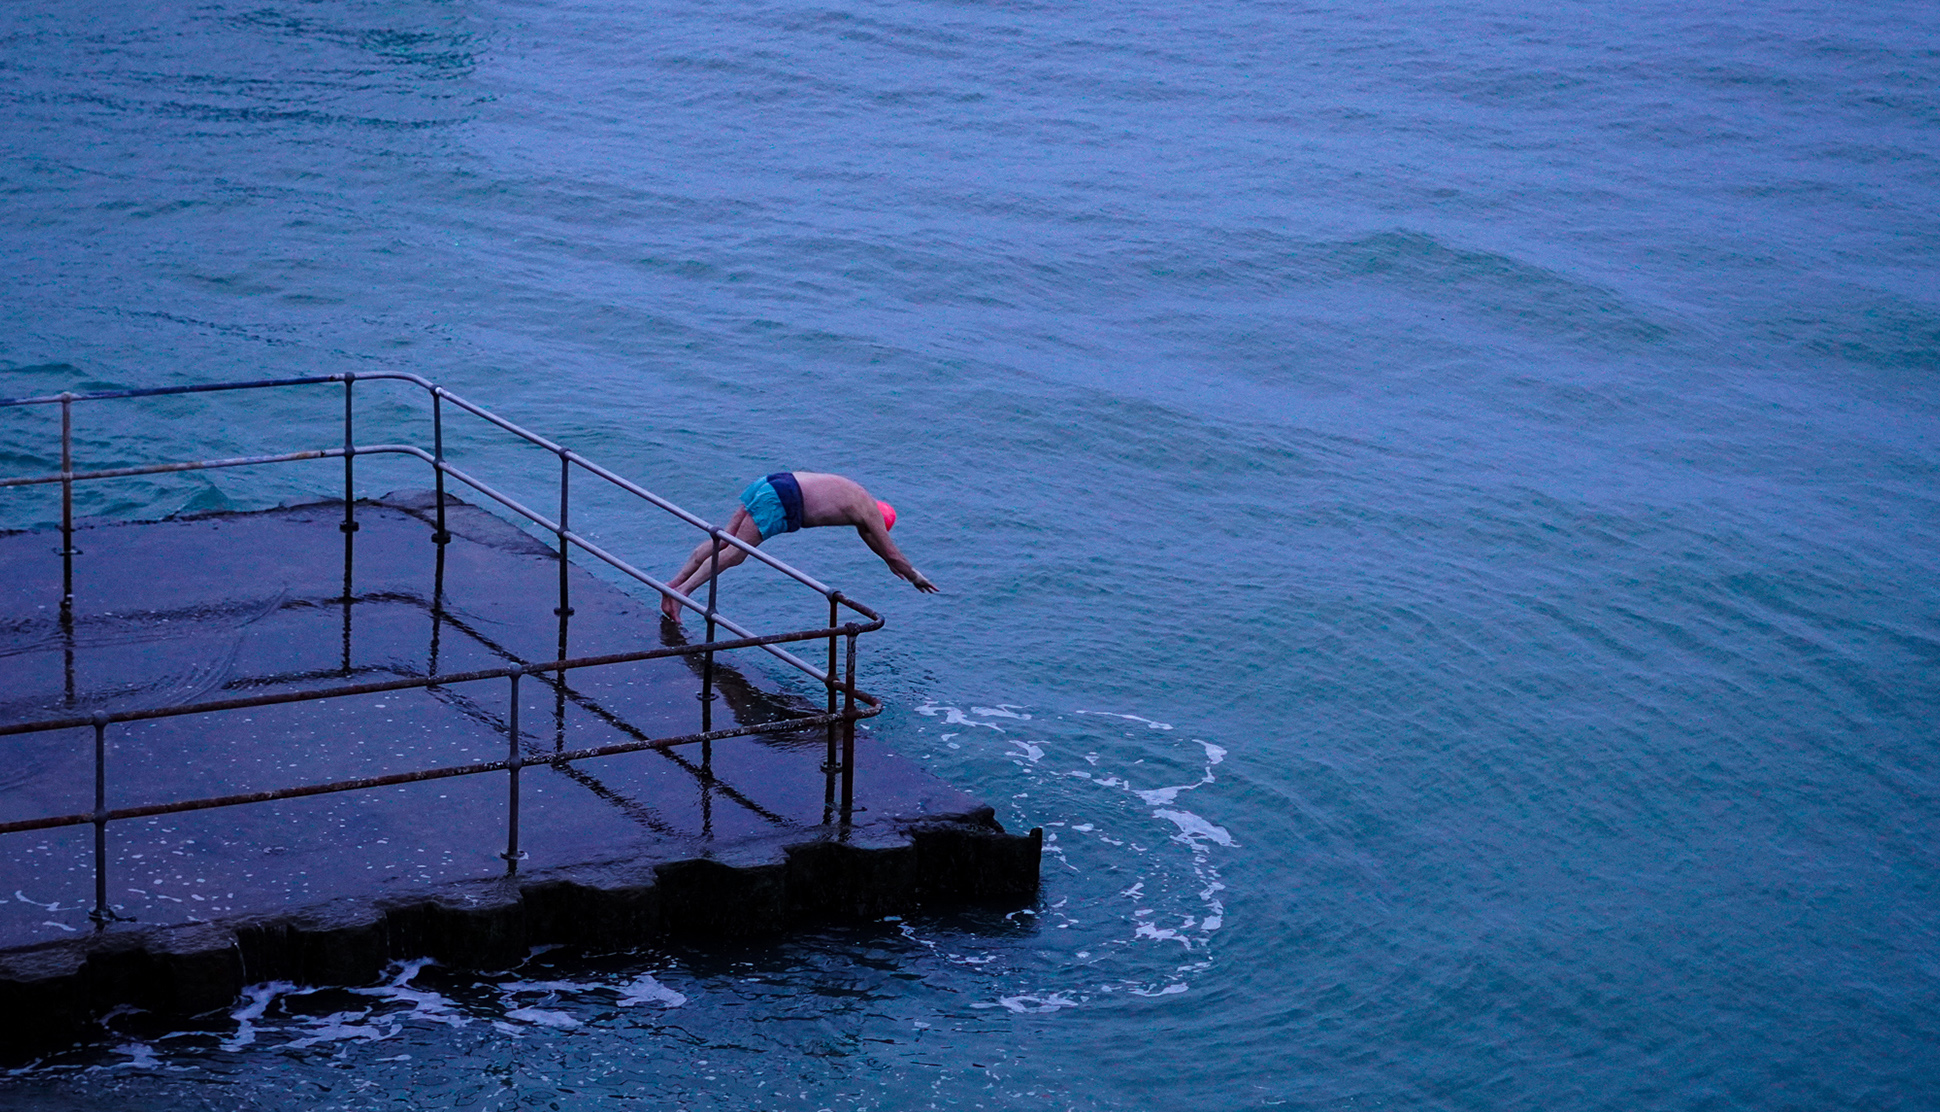 Winter Photography Competition 2021 - Winning Photo of Colder Water Swimmer in Portsmouth